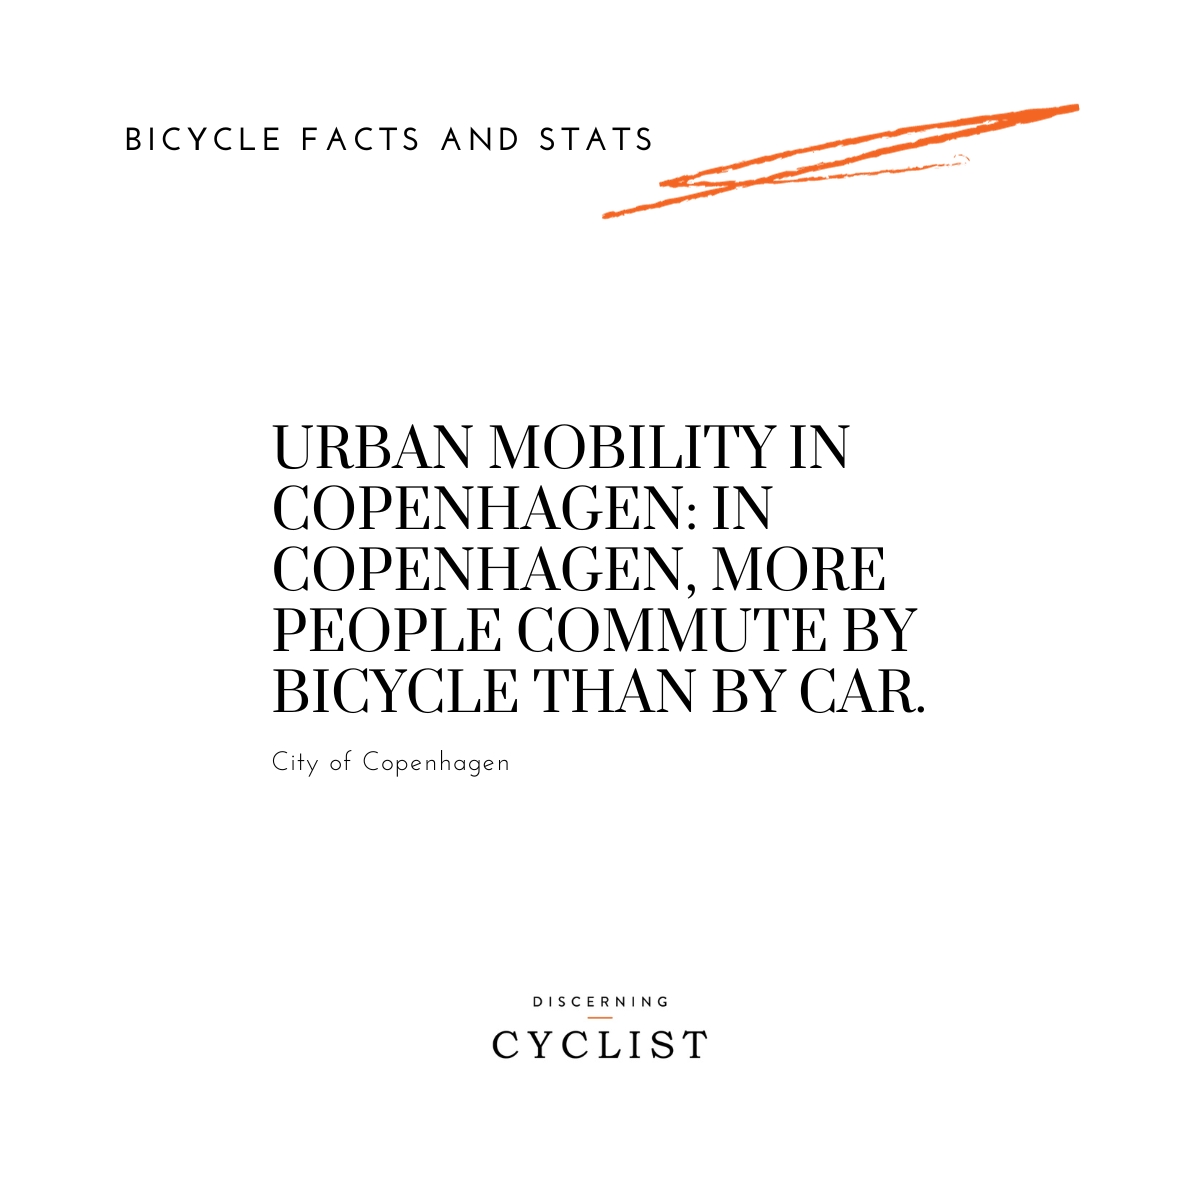 Urban Mobility in Copenhagen: In Copenhagen, more people commute by bicycle than by car.